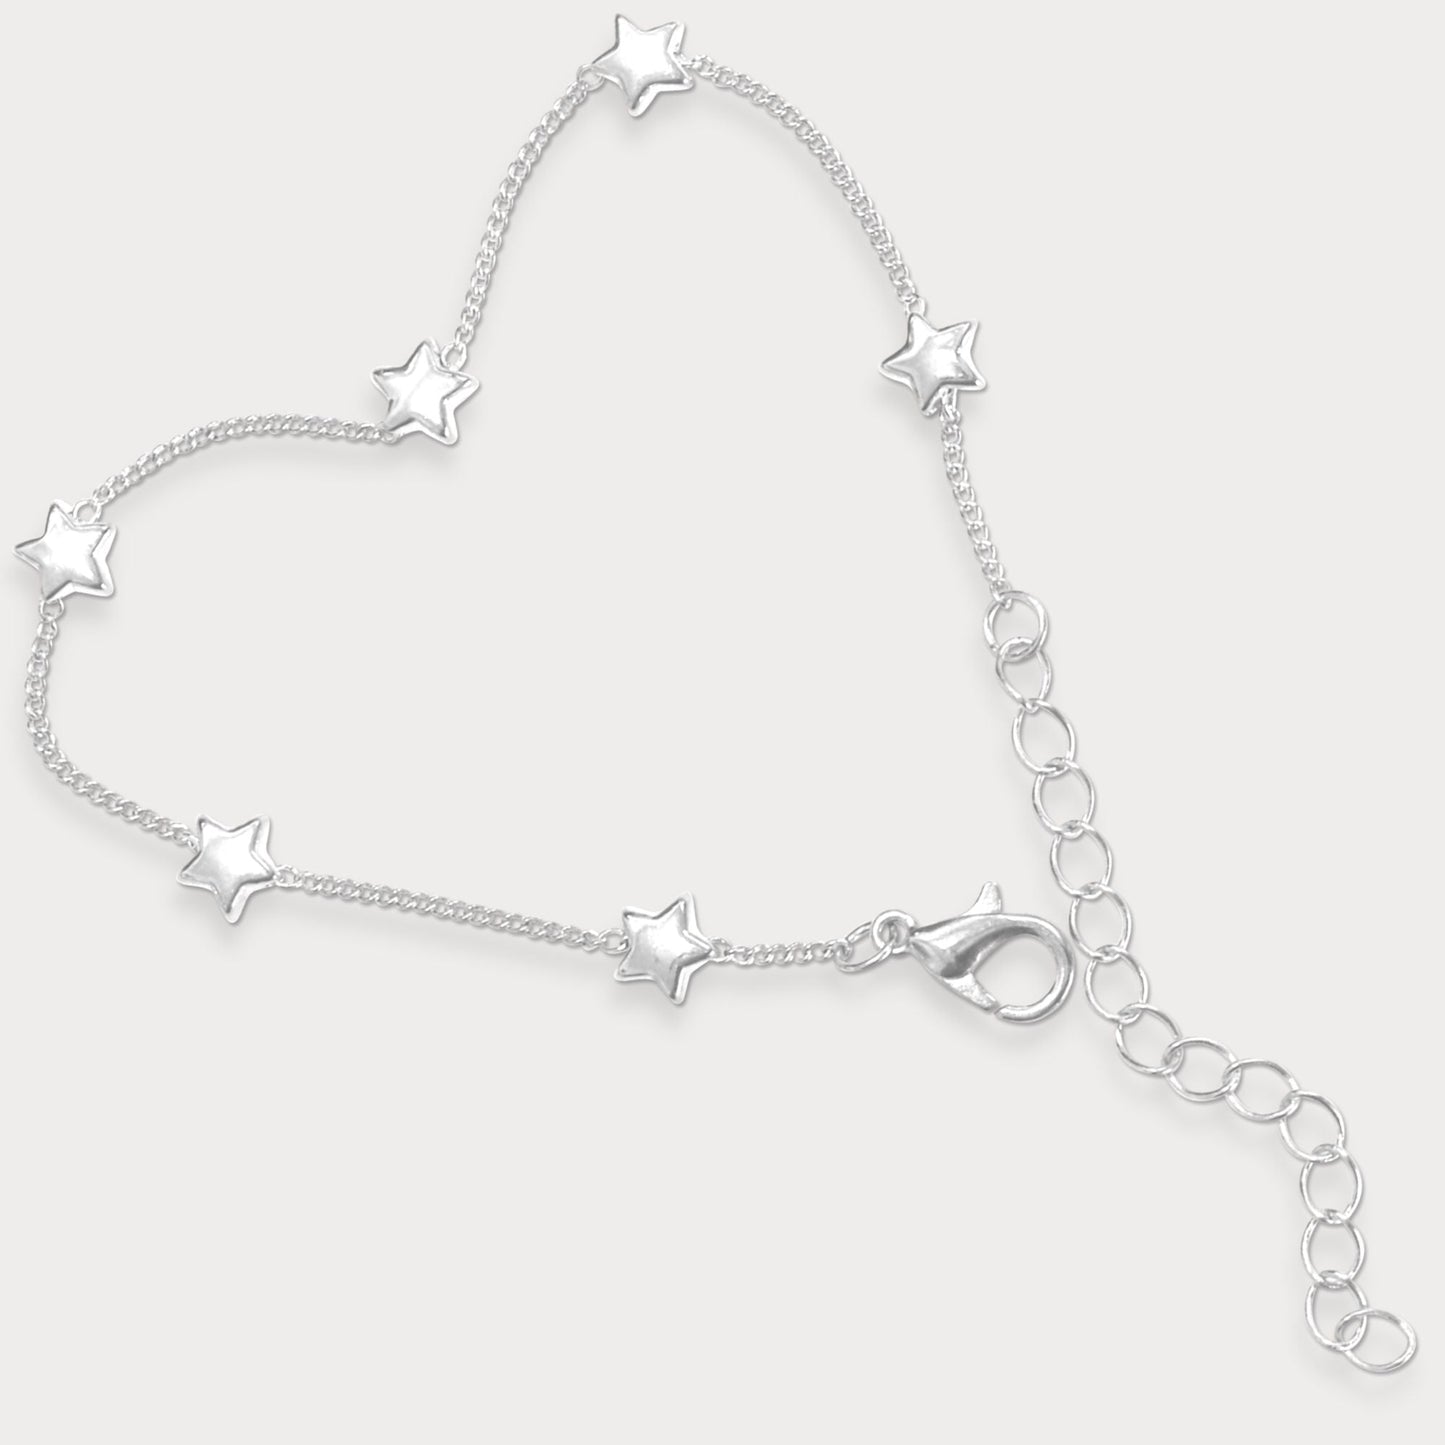 Soul Sister Gifts - 925 Silver Star Bracelet with Card and Gift Wrap